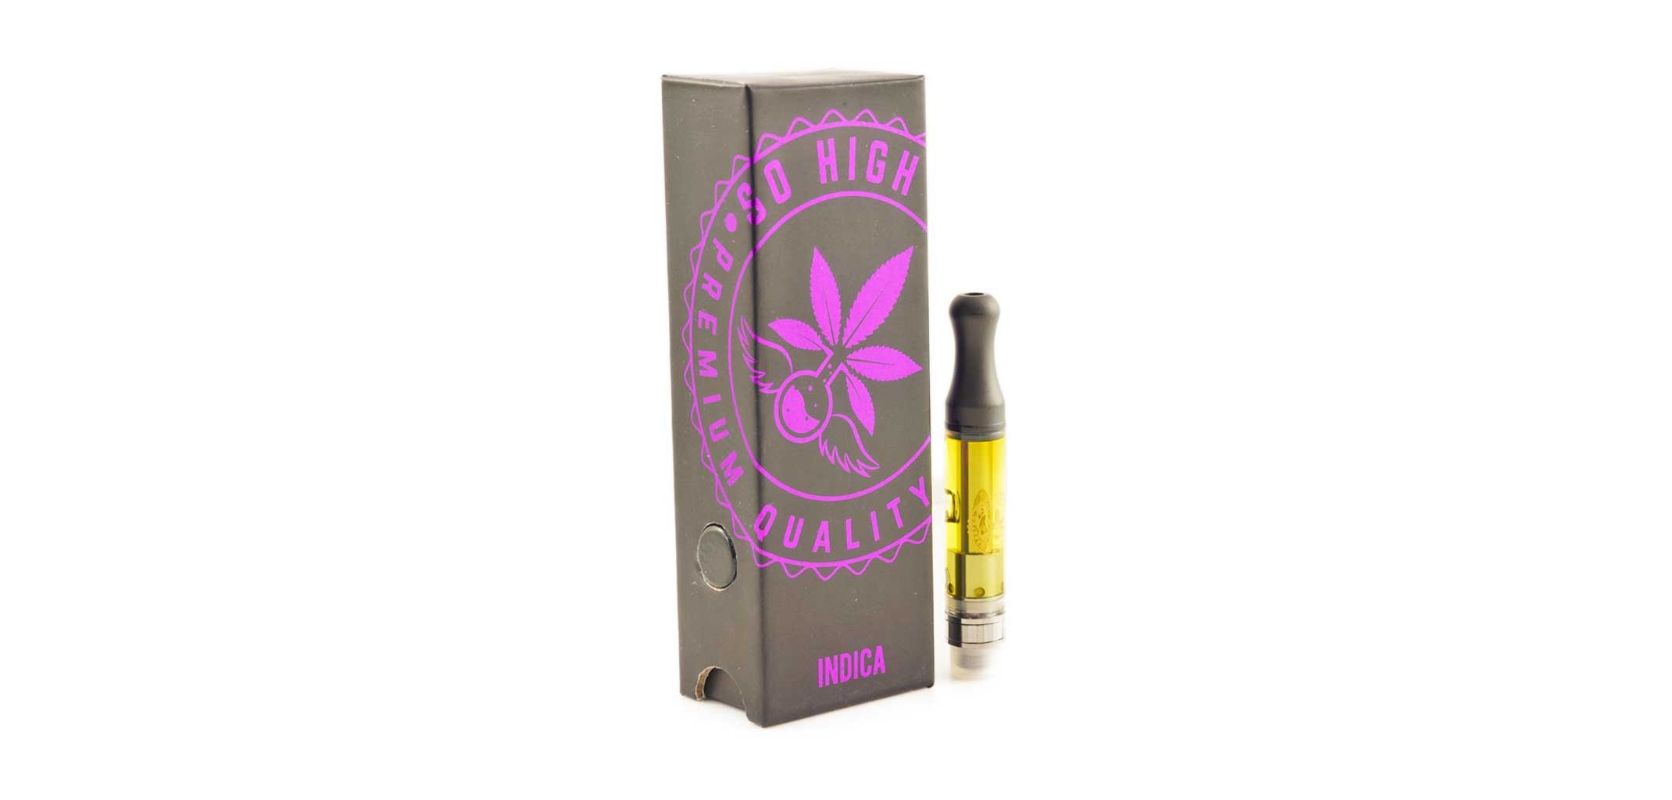 The So High Extracts Premium Vape 1ML THC - Tom Ford (Indica) is a fantastic option if you are looking for a wax pen with THC. 